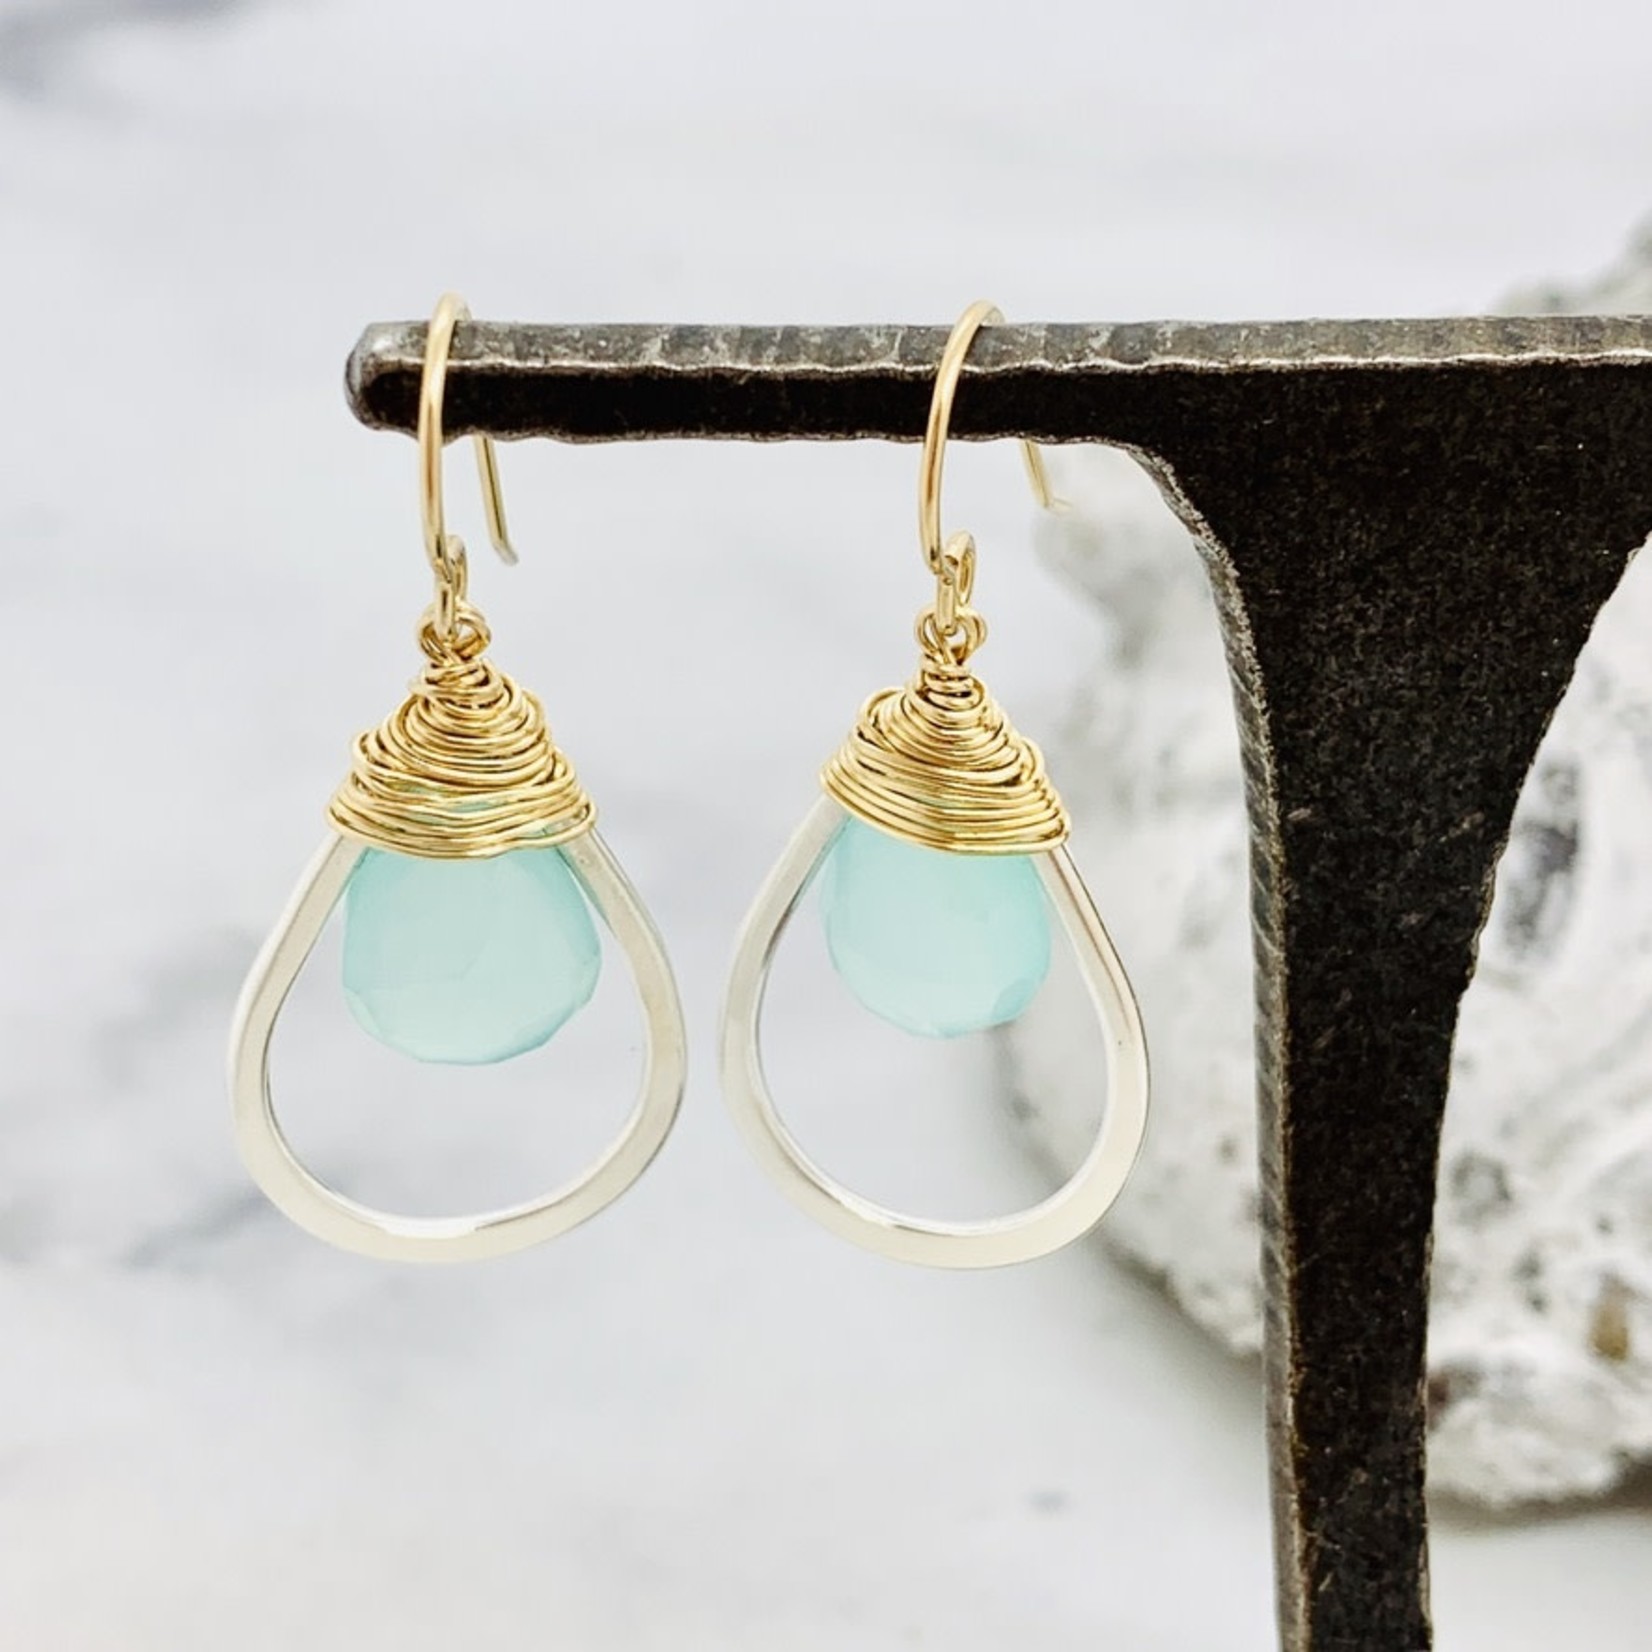 Handmade earrings with faceted aqua chalcedony wrapped in 14k gf and hanging in sterling teardrop